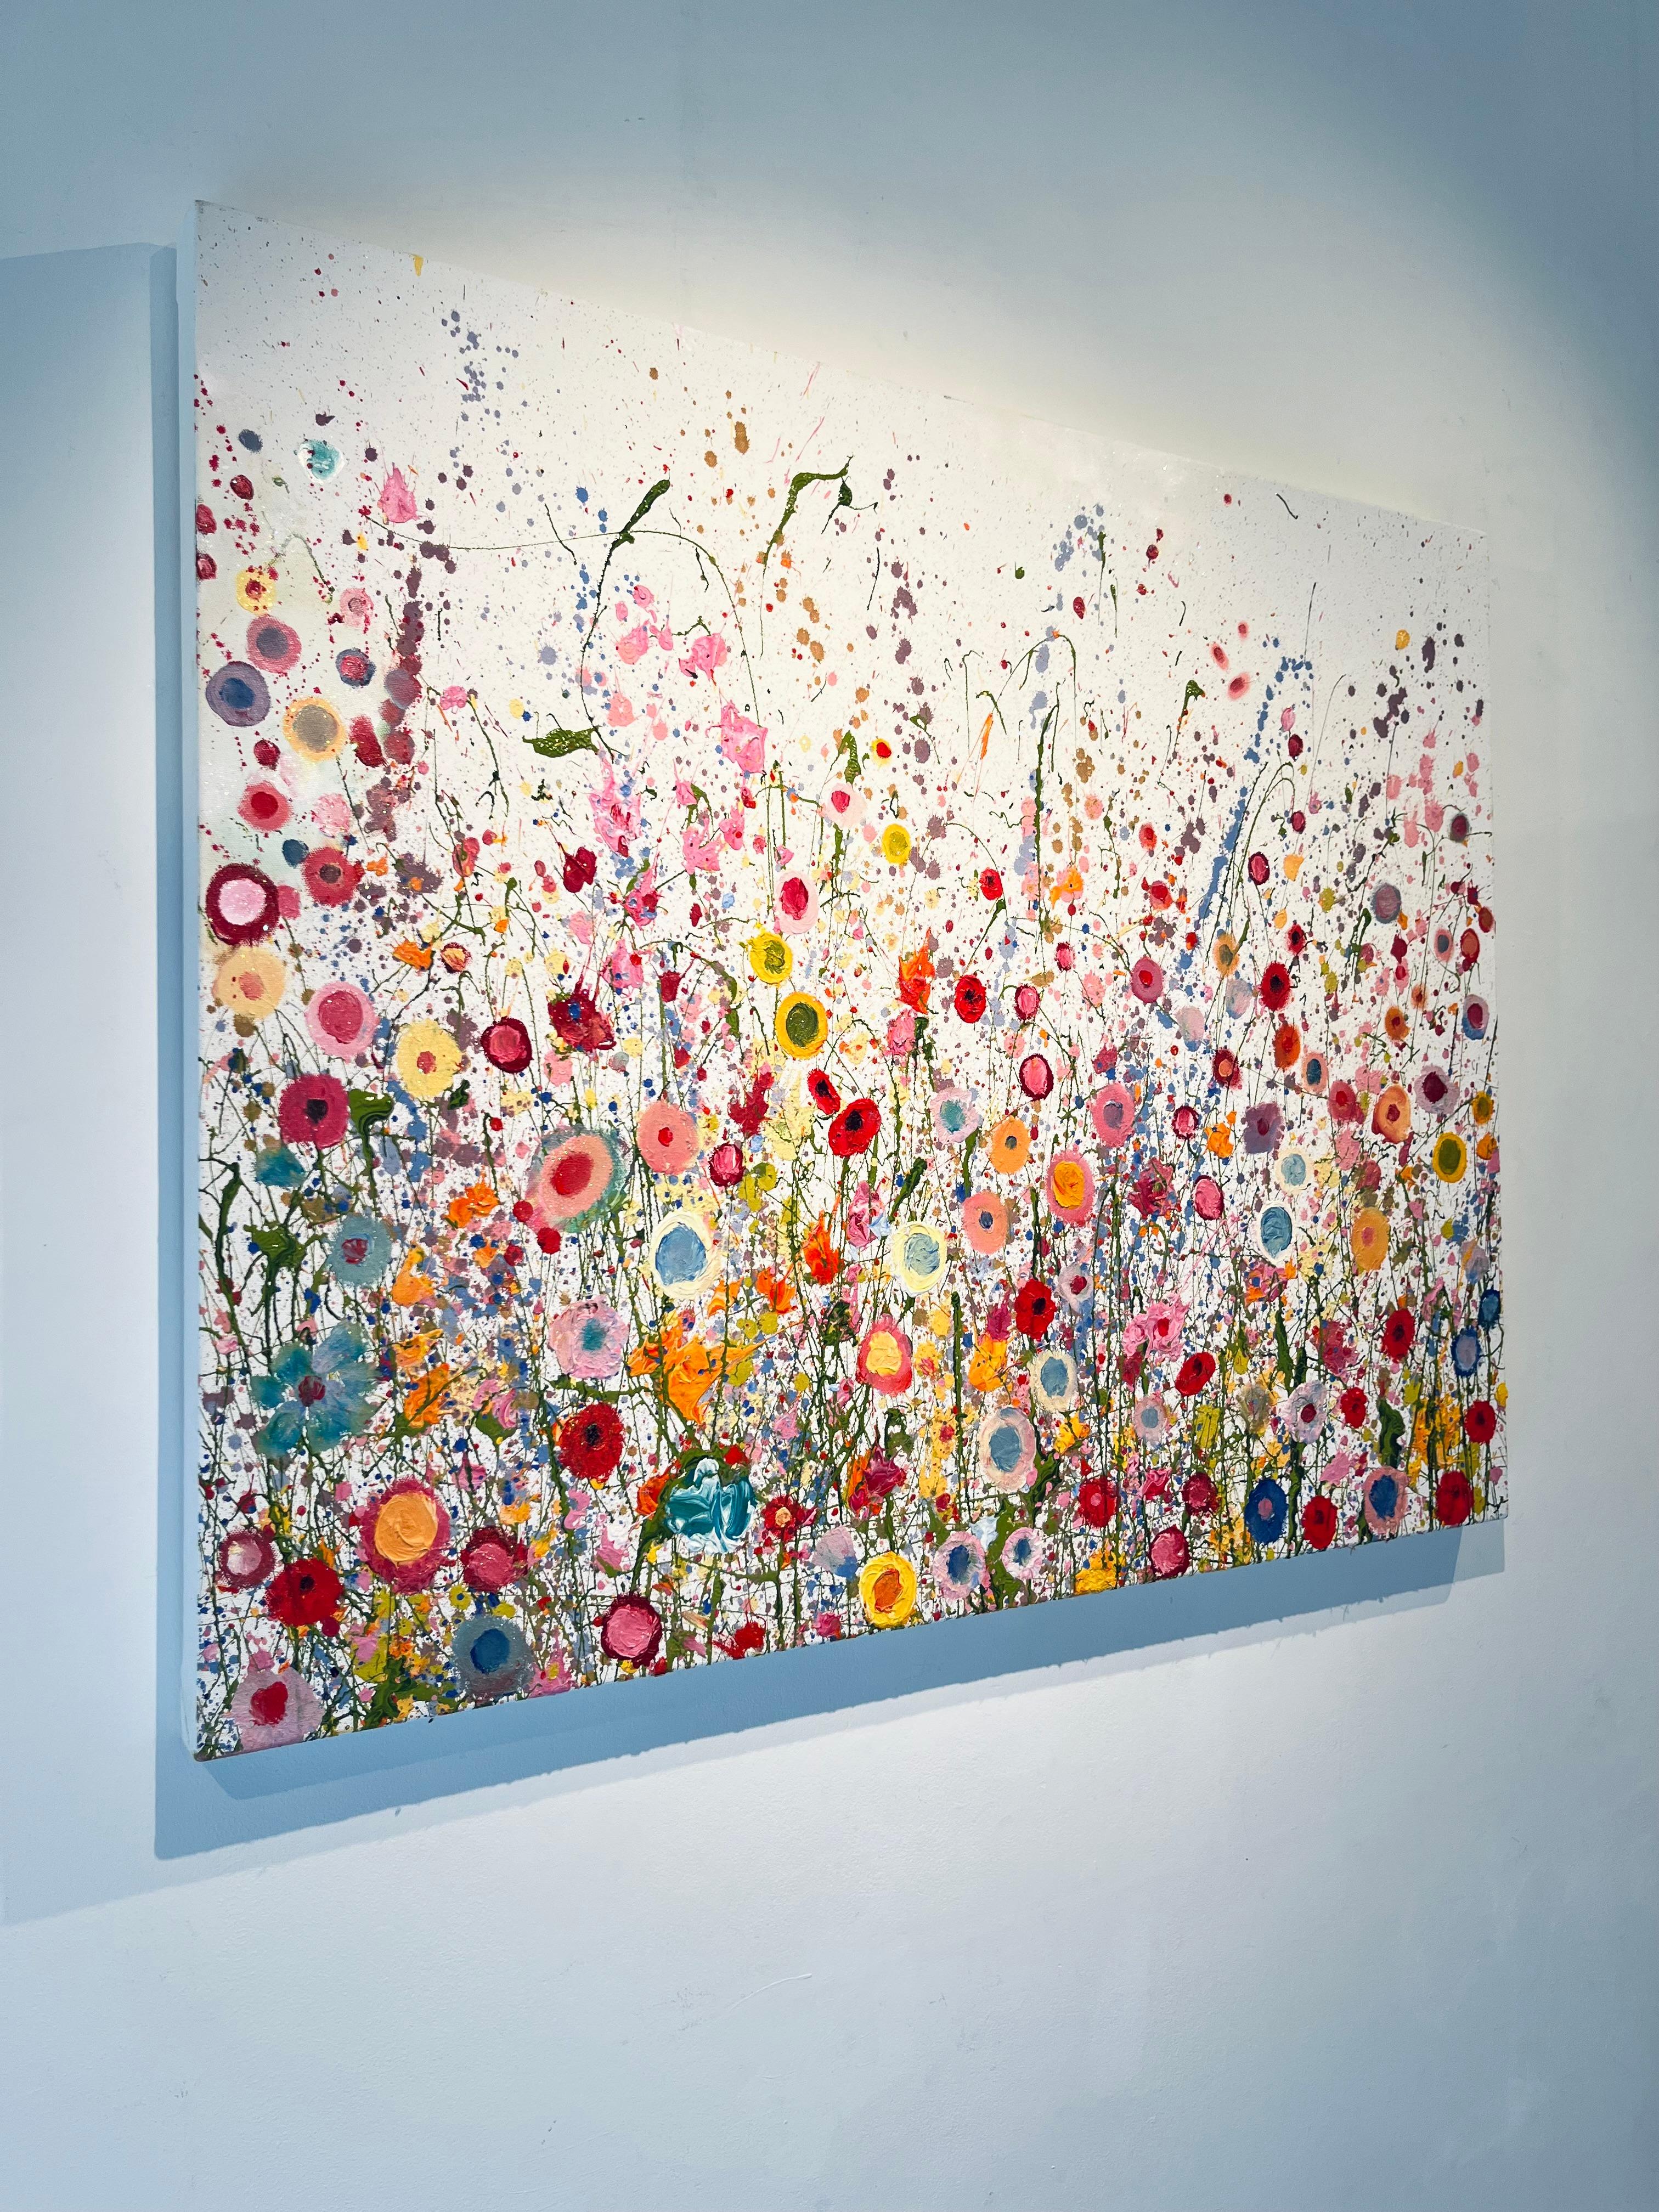 I Love You With All My Heart- original floral abstract painting contemporary art - Naturalistic Painting by Yvonne Coomber